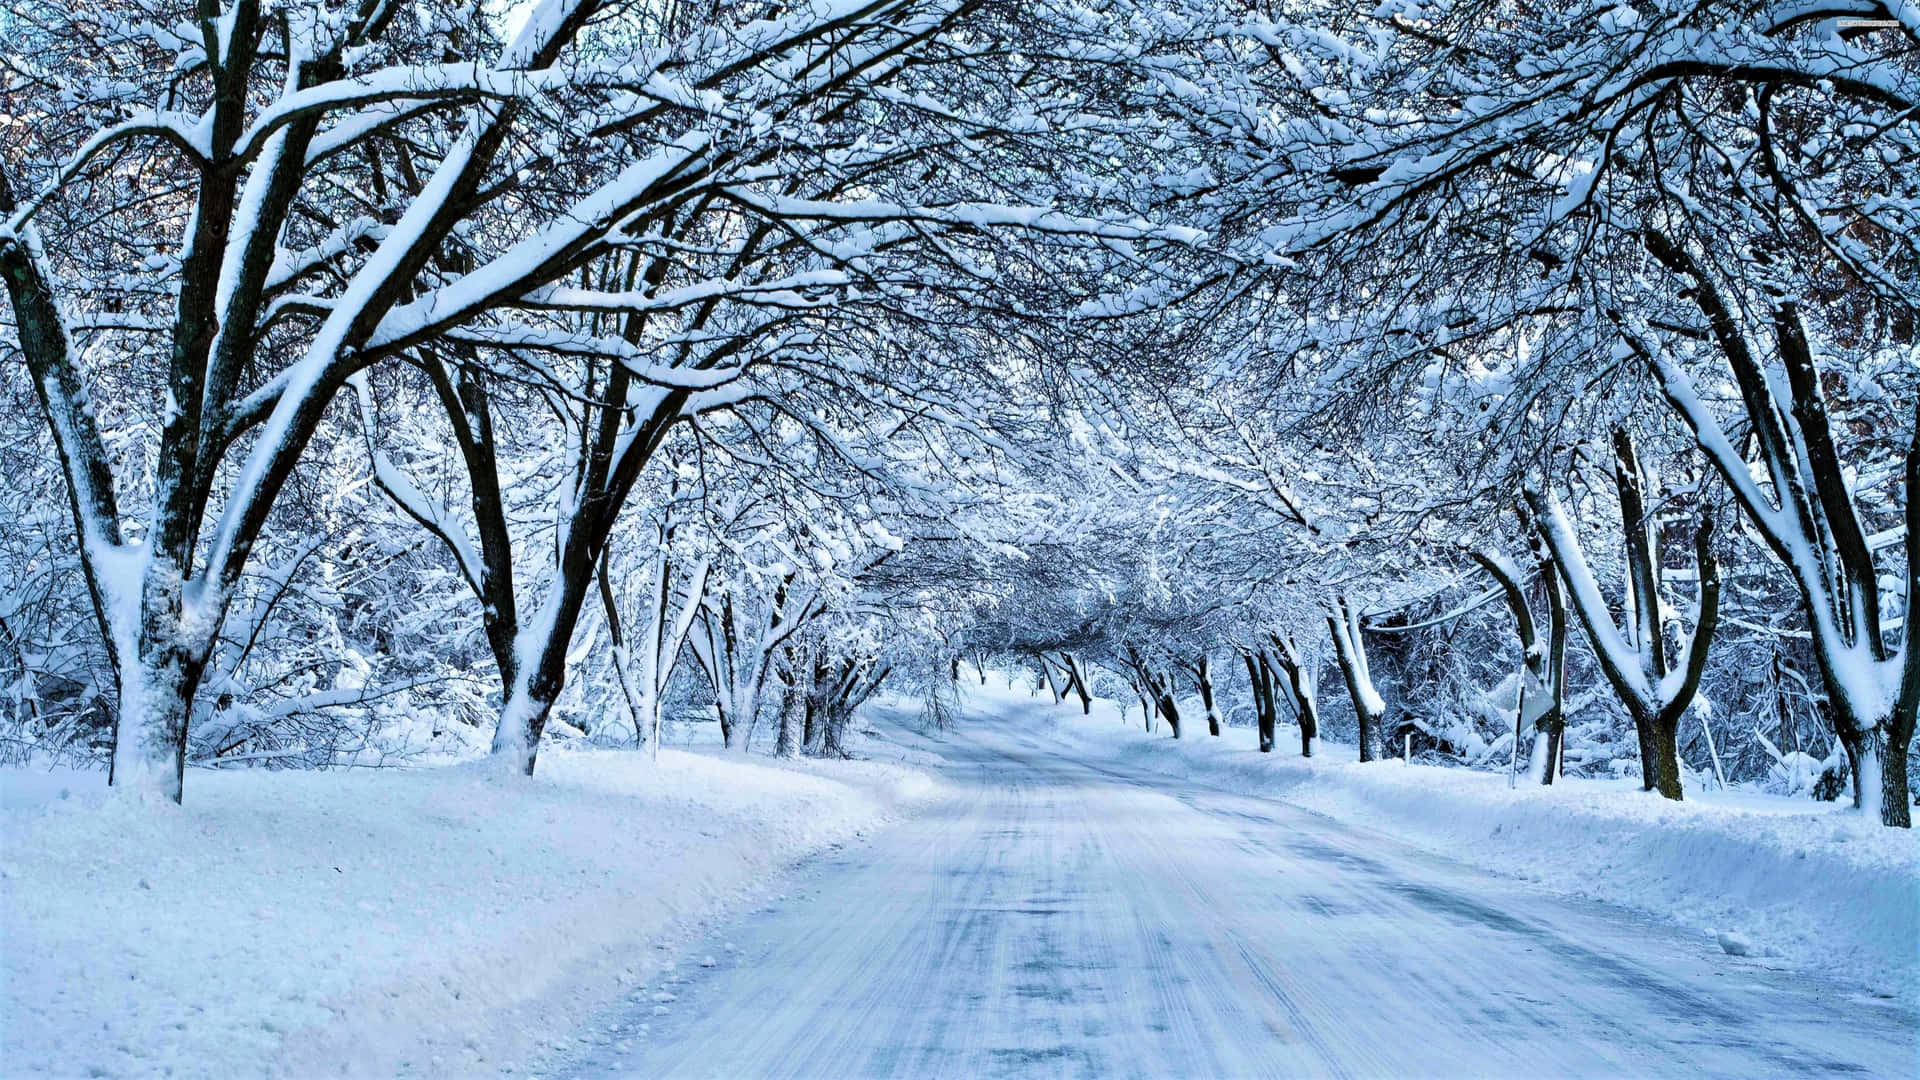 Slippery Icy Road during Winter Season Wallpaper